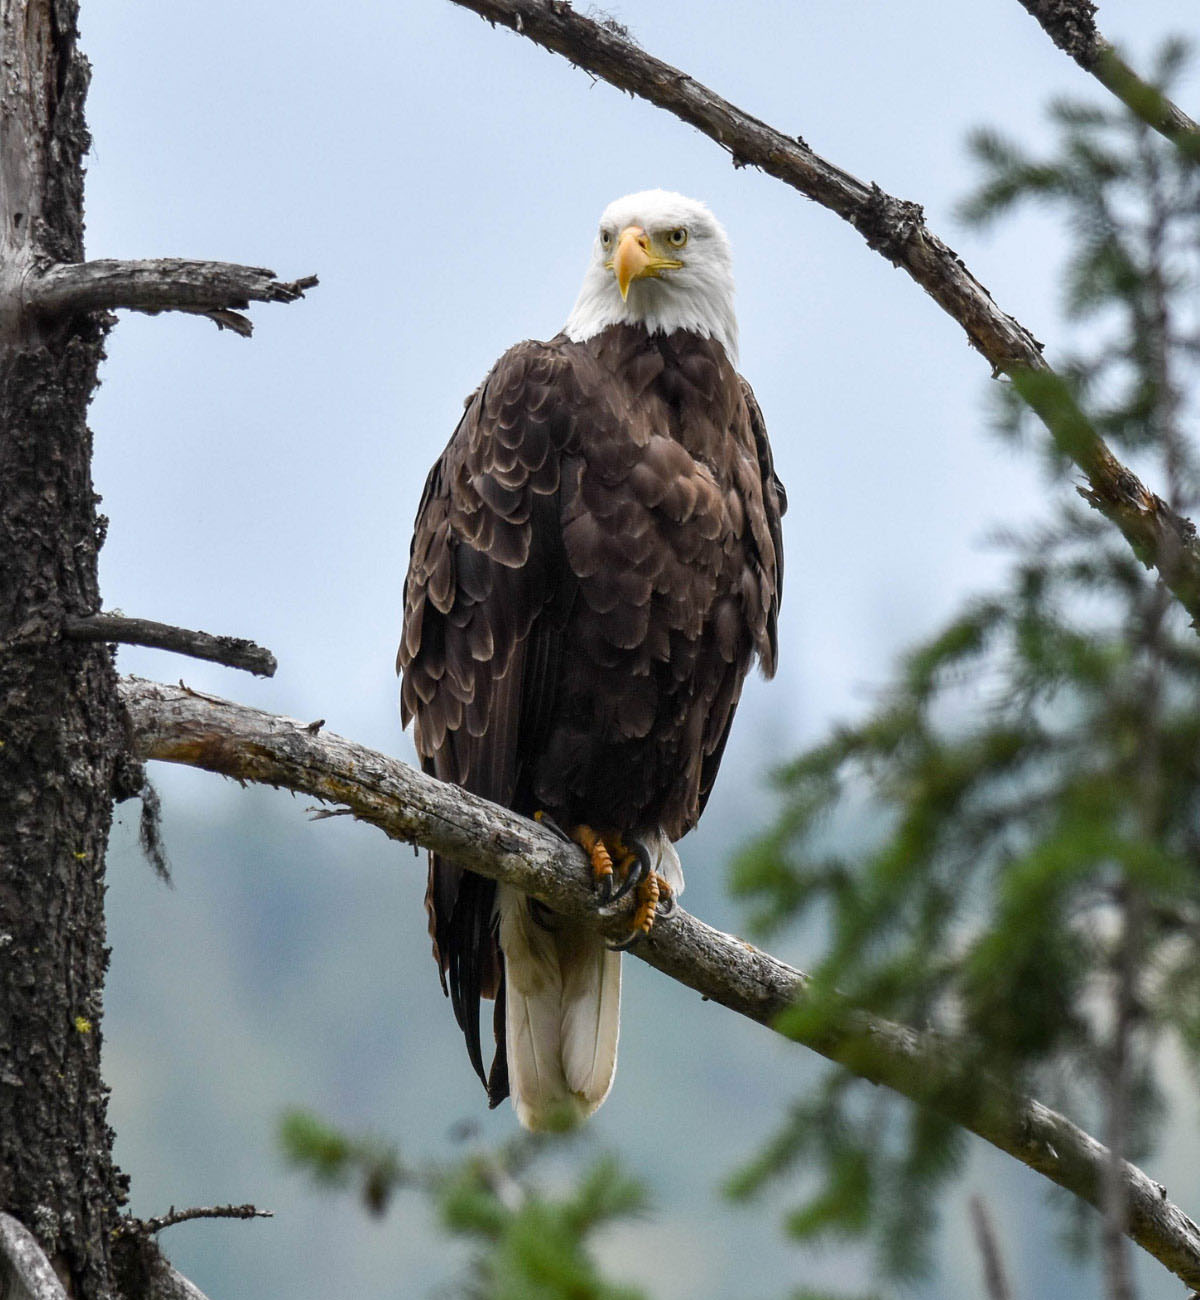 A bald eagle sits on a branch, looking over a lush green forest